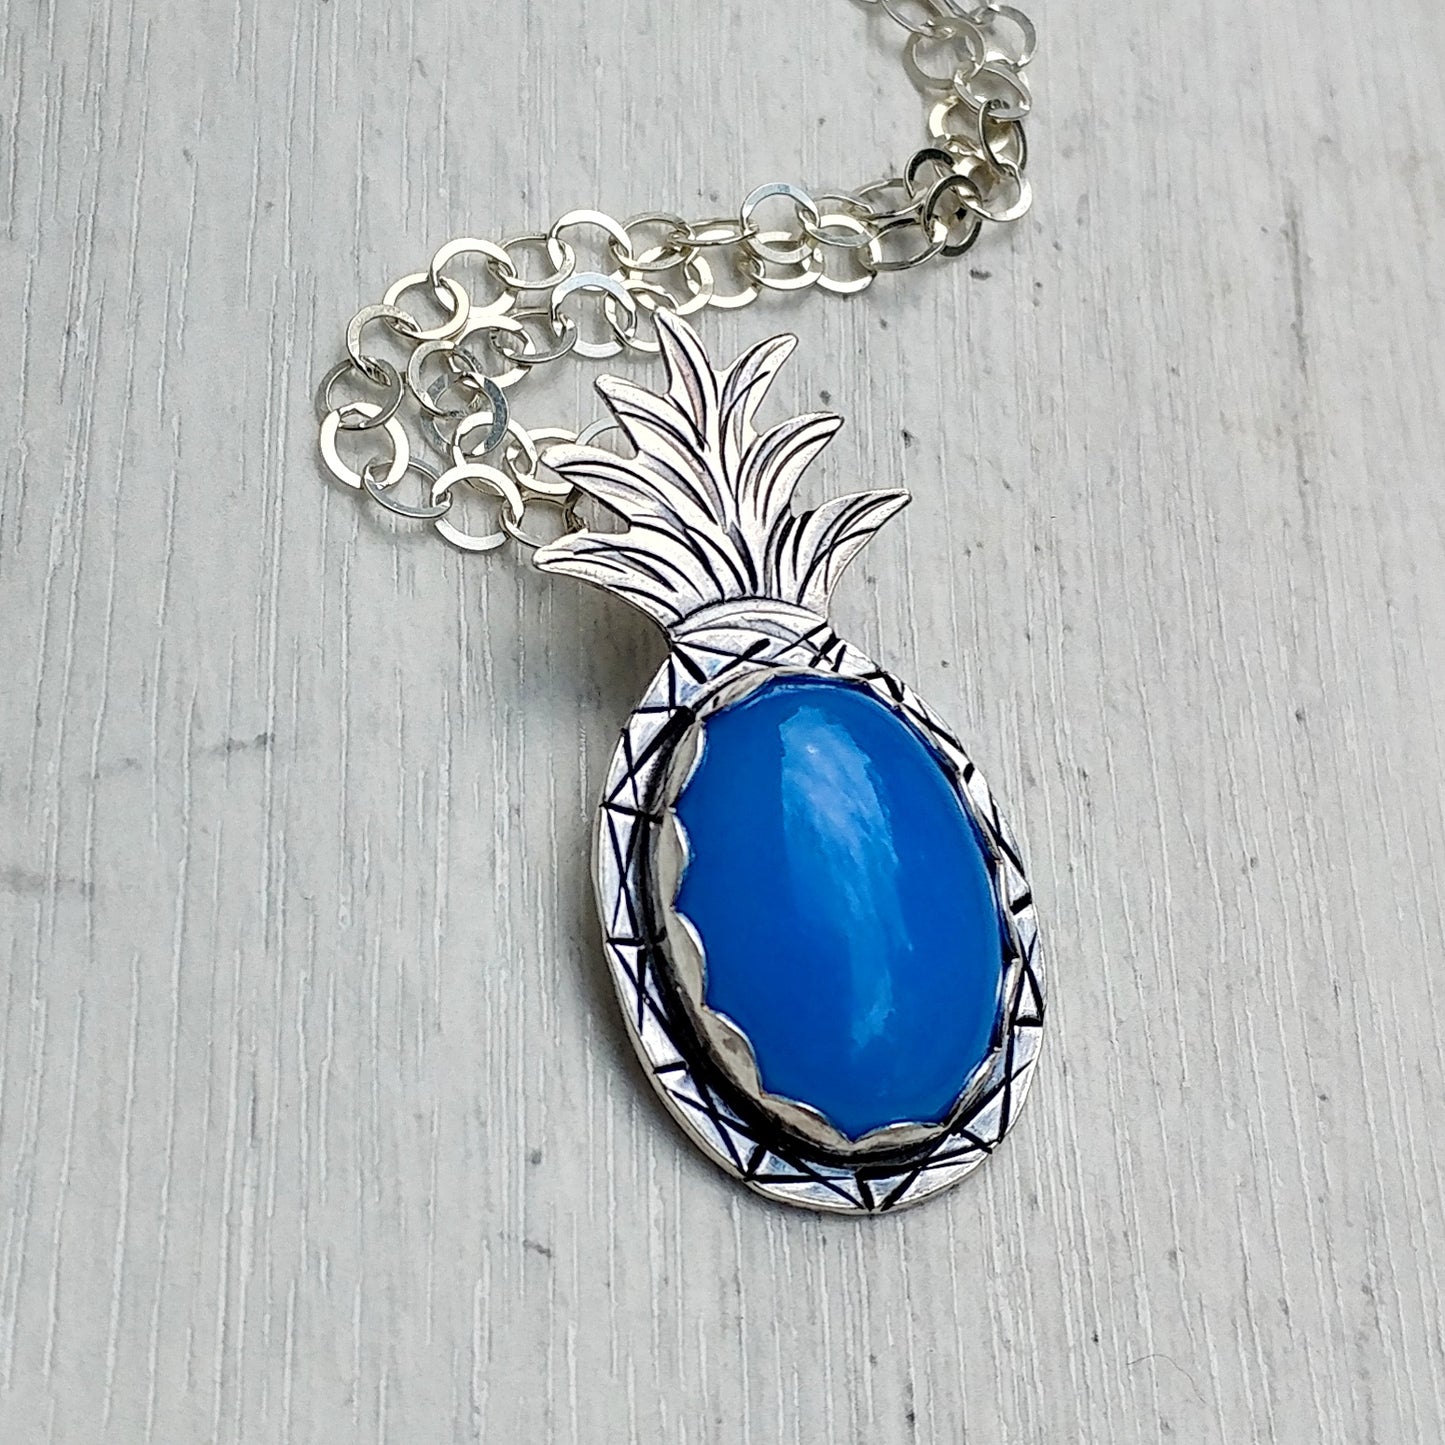 Blue agate sterling silver pineapple necklace